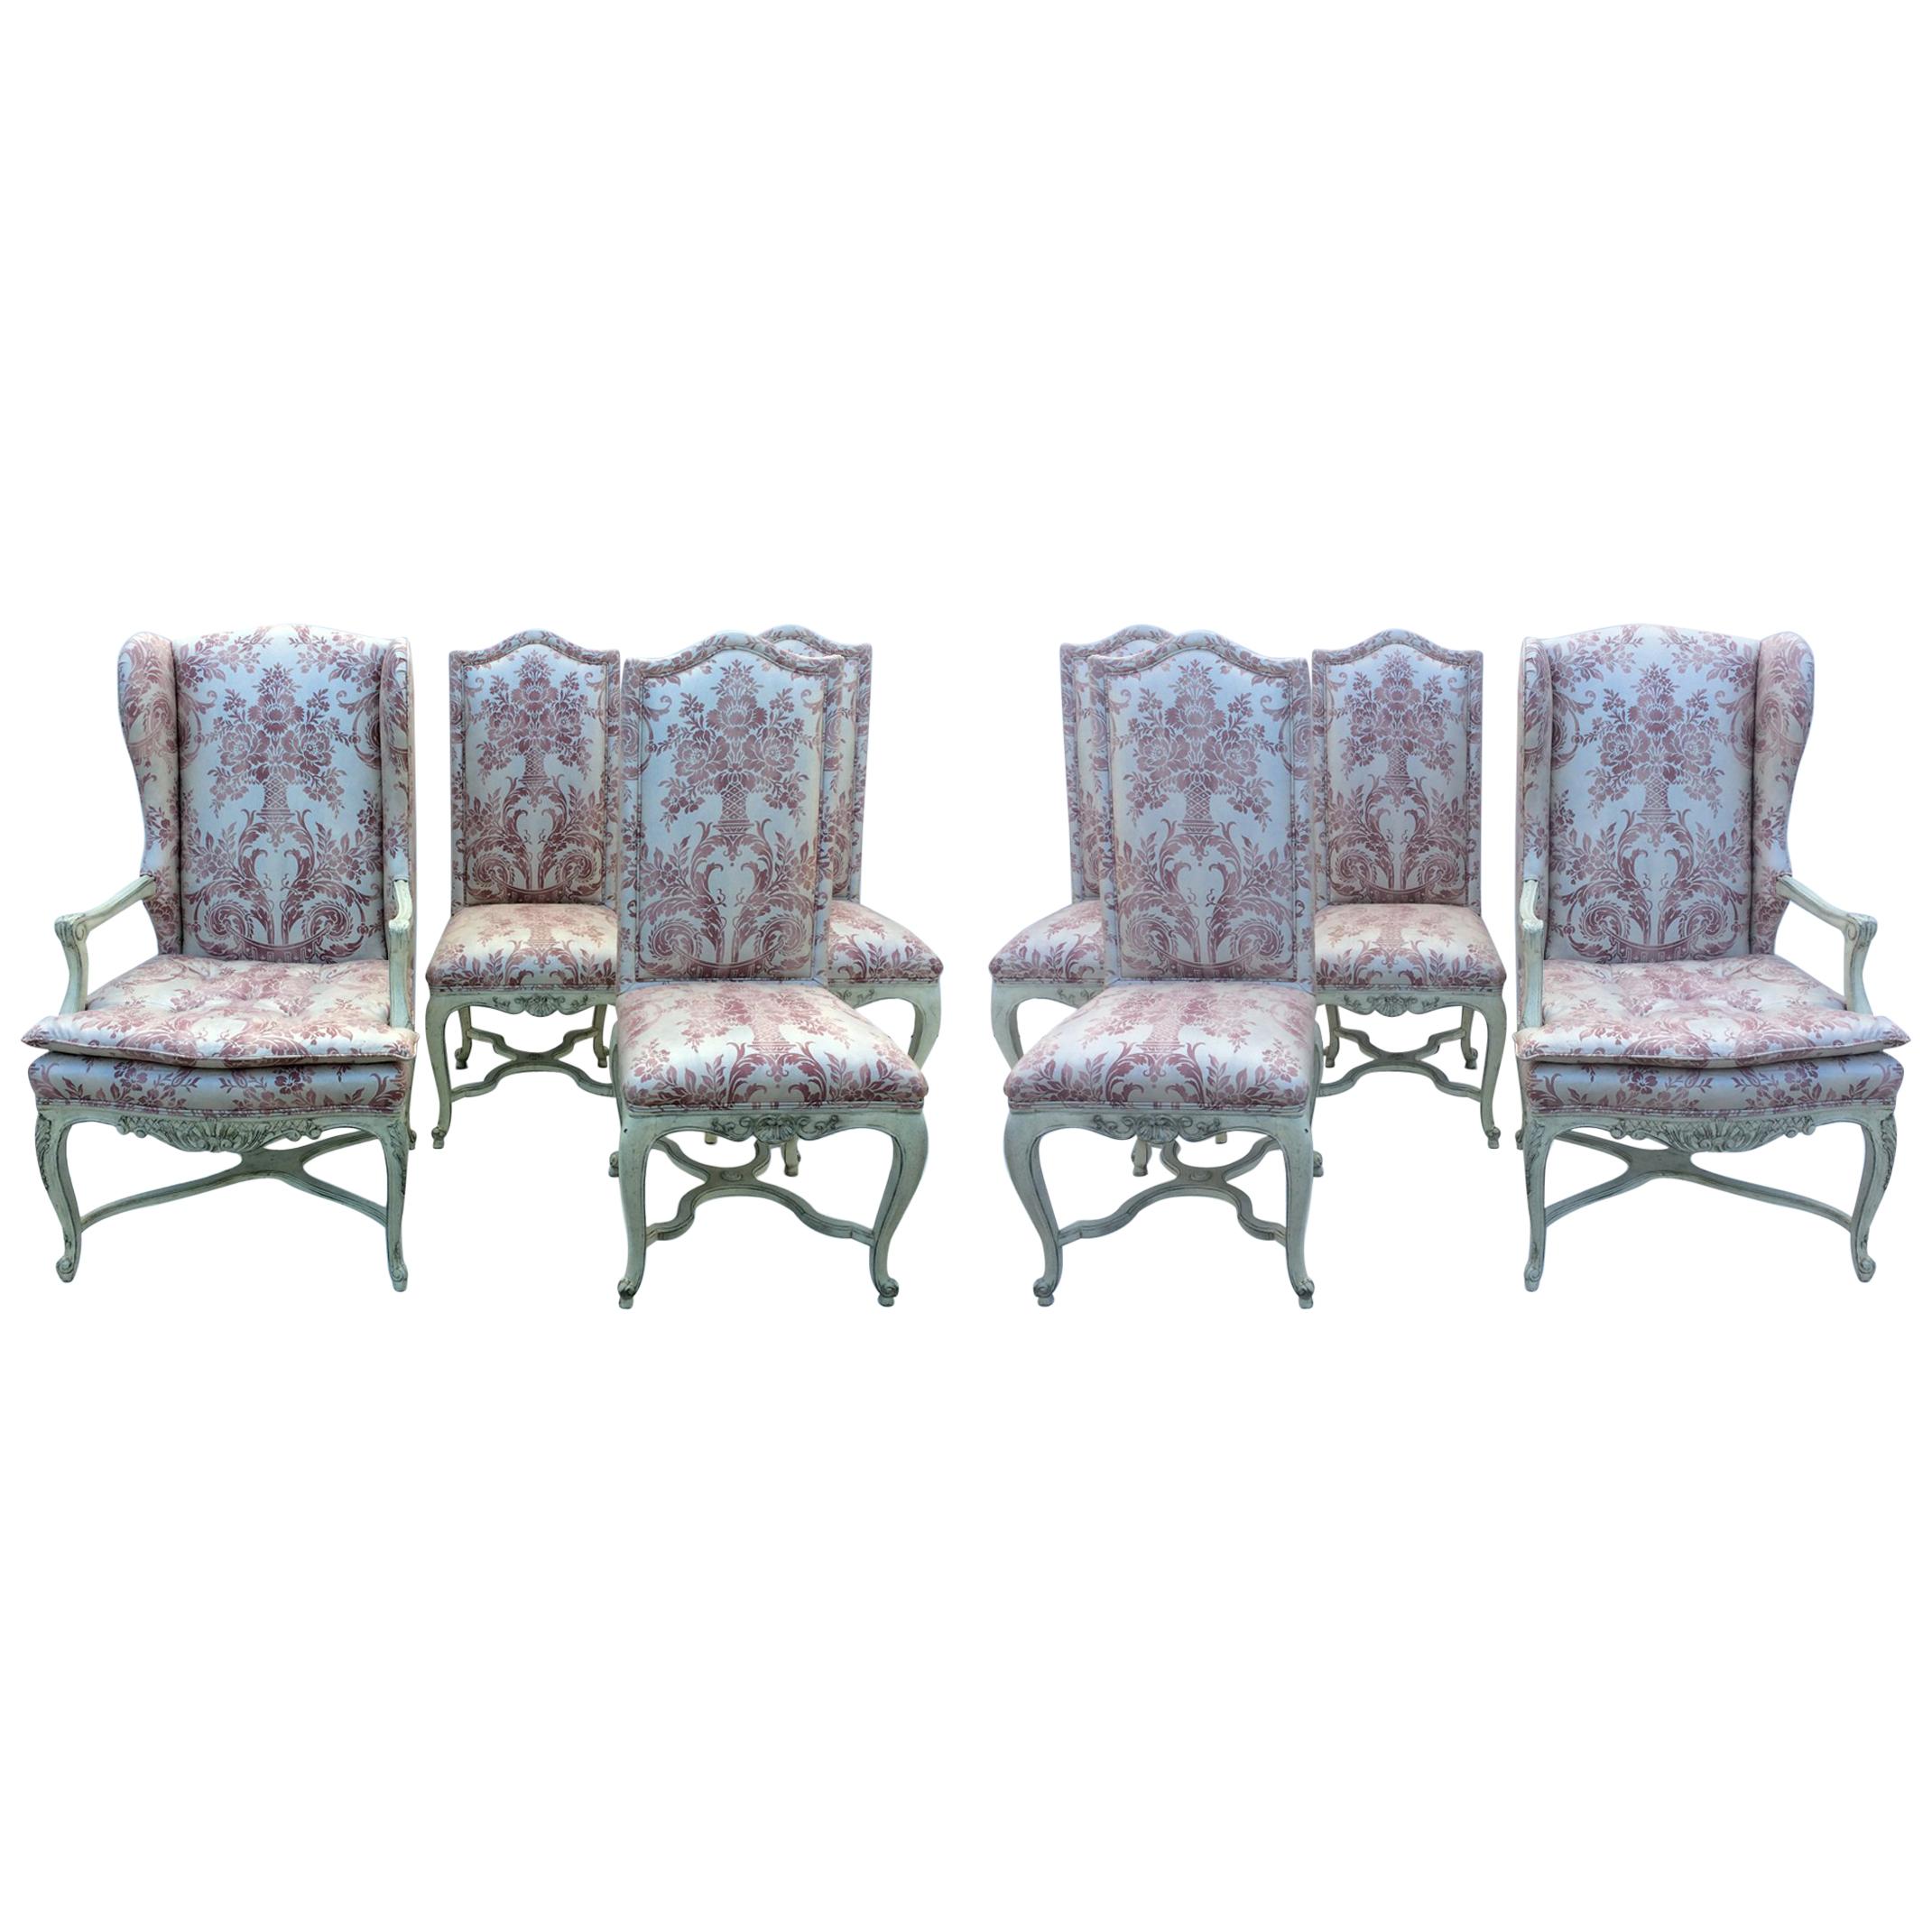 Eight Dining Room Chairs with Fortuny Style Fabric